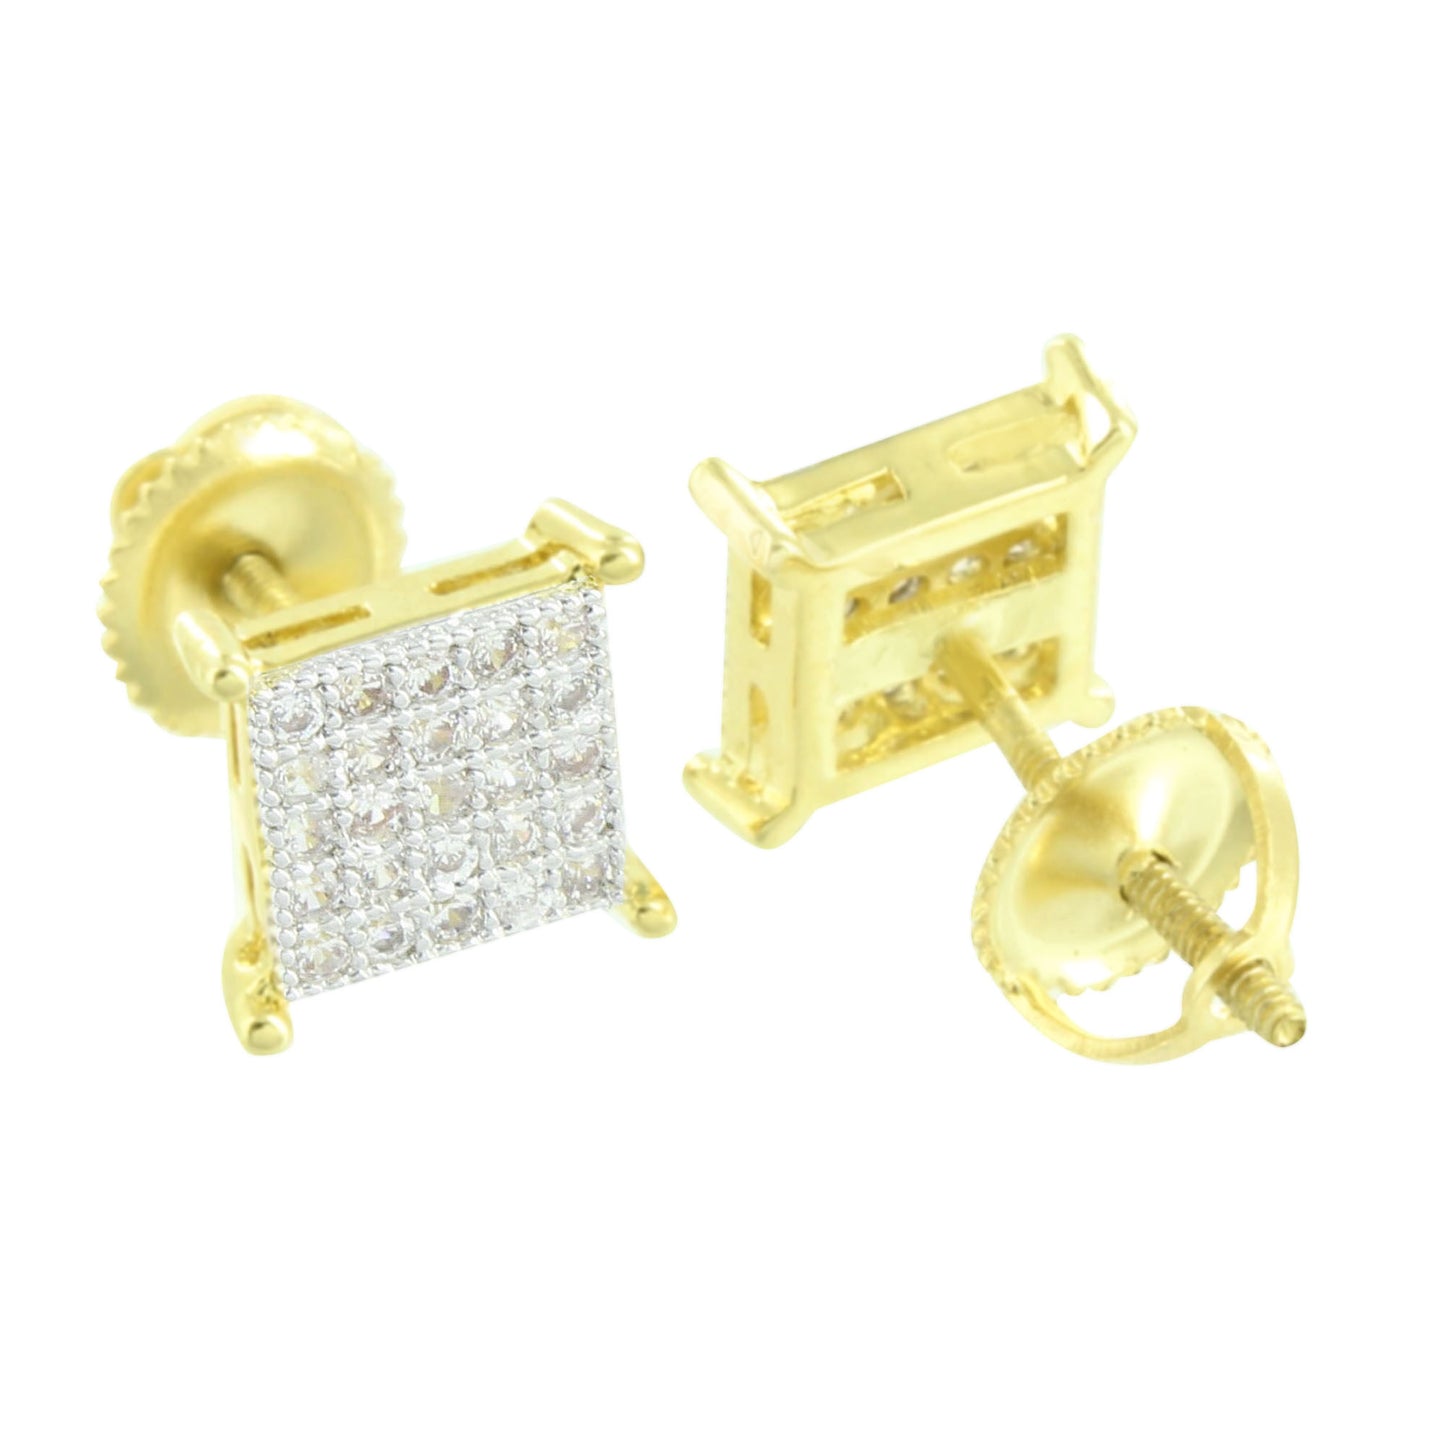 Gold Finish Square Earrings Screw Back Micro Pave